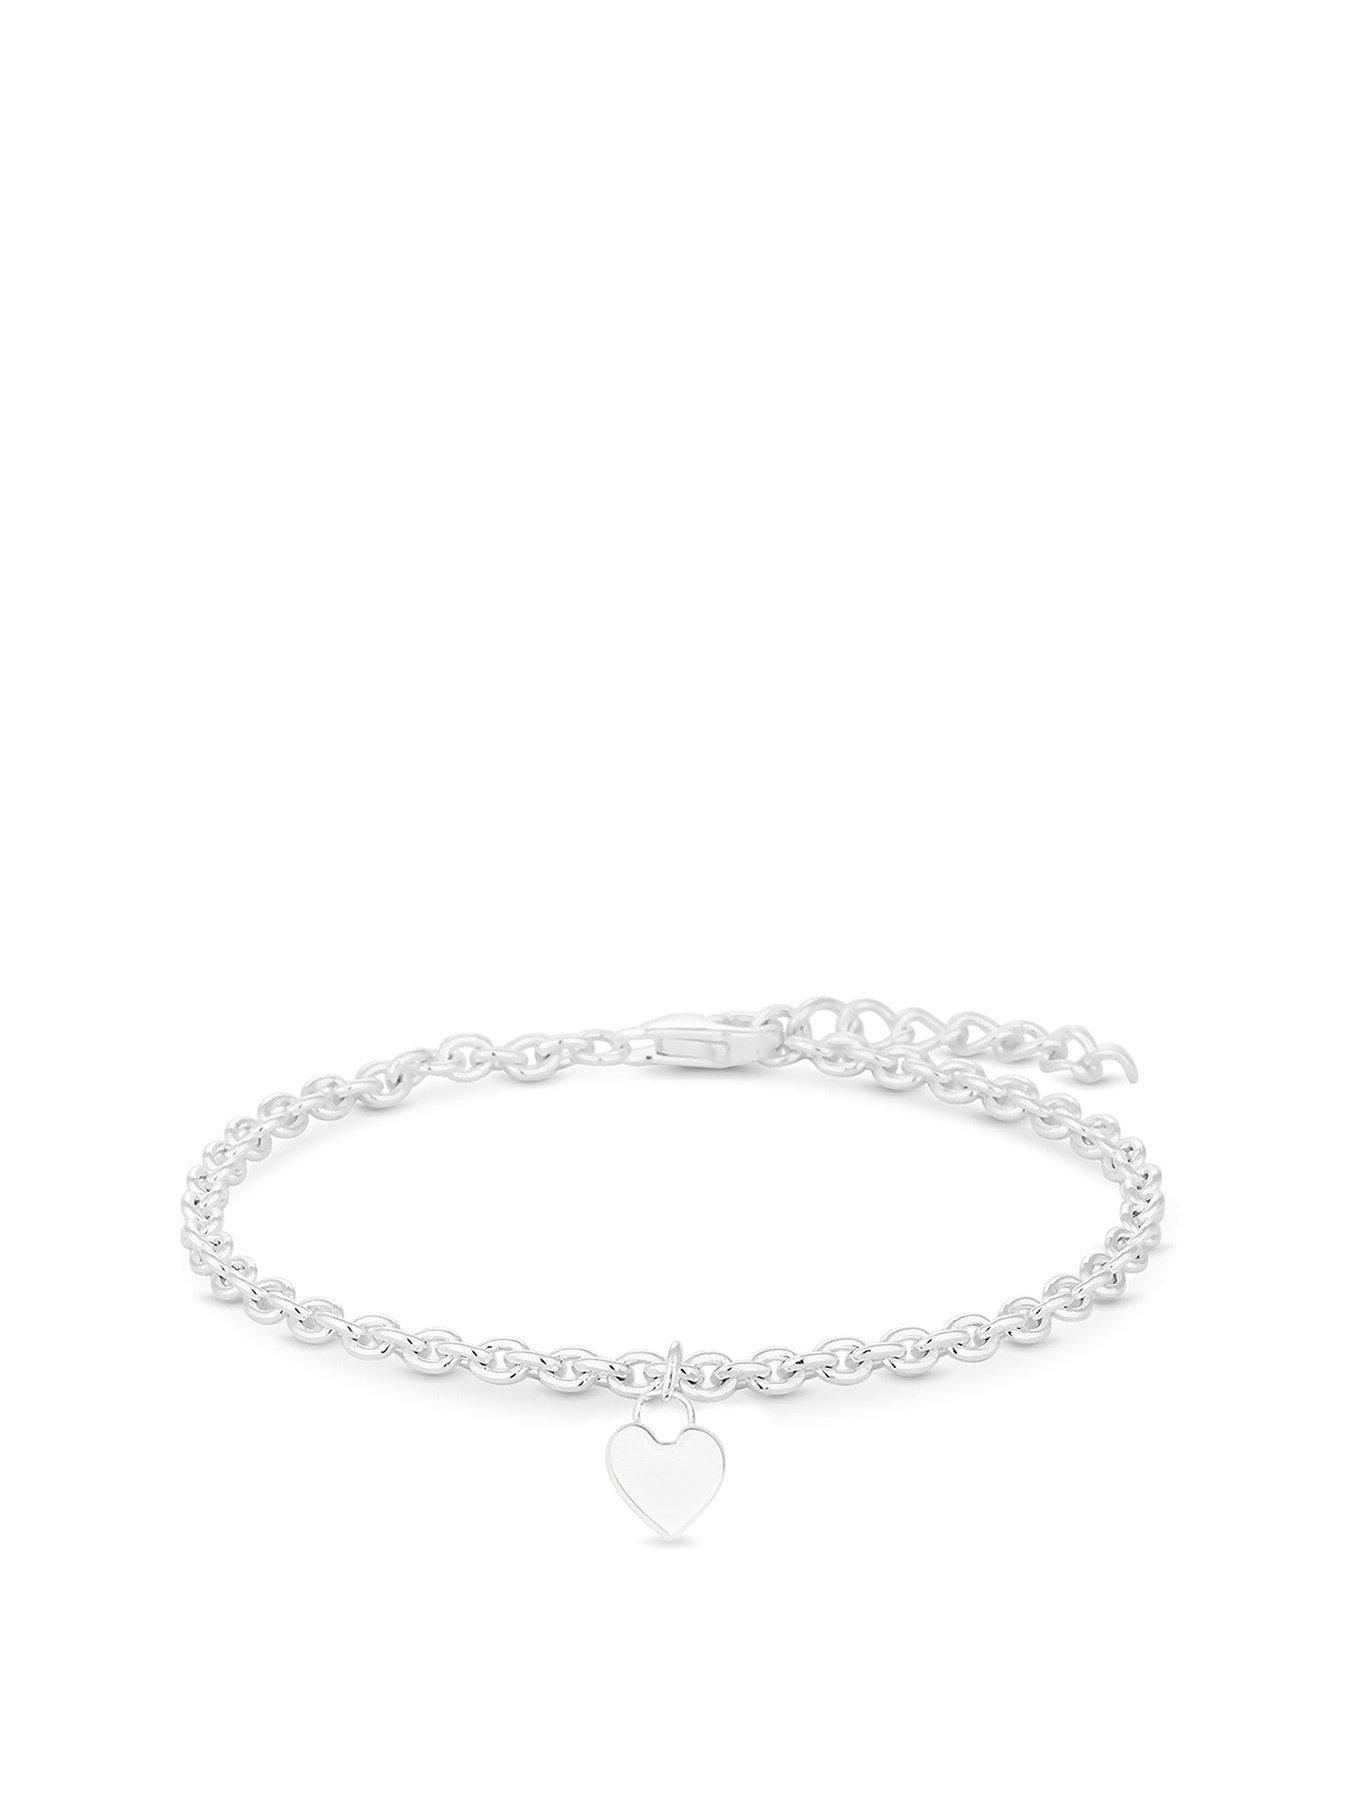 Jewellery & watches Sterling Silver Polished Charmed Heart Bracelet